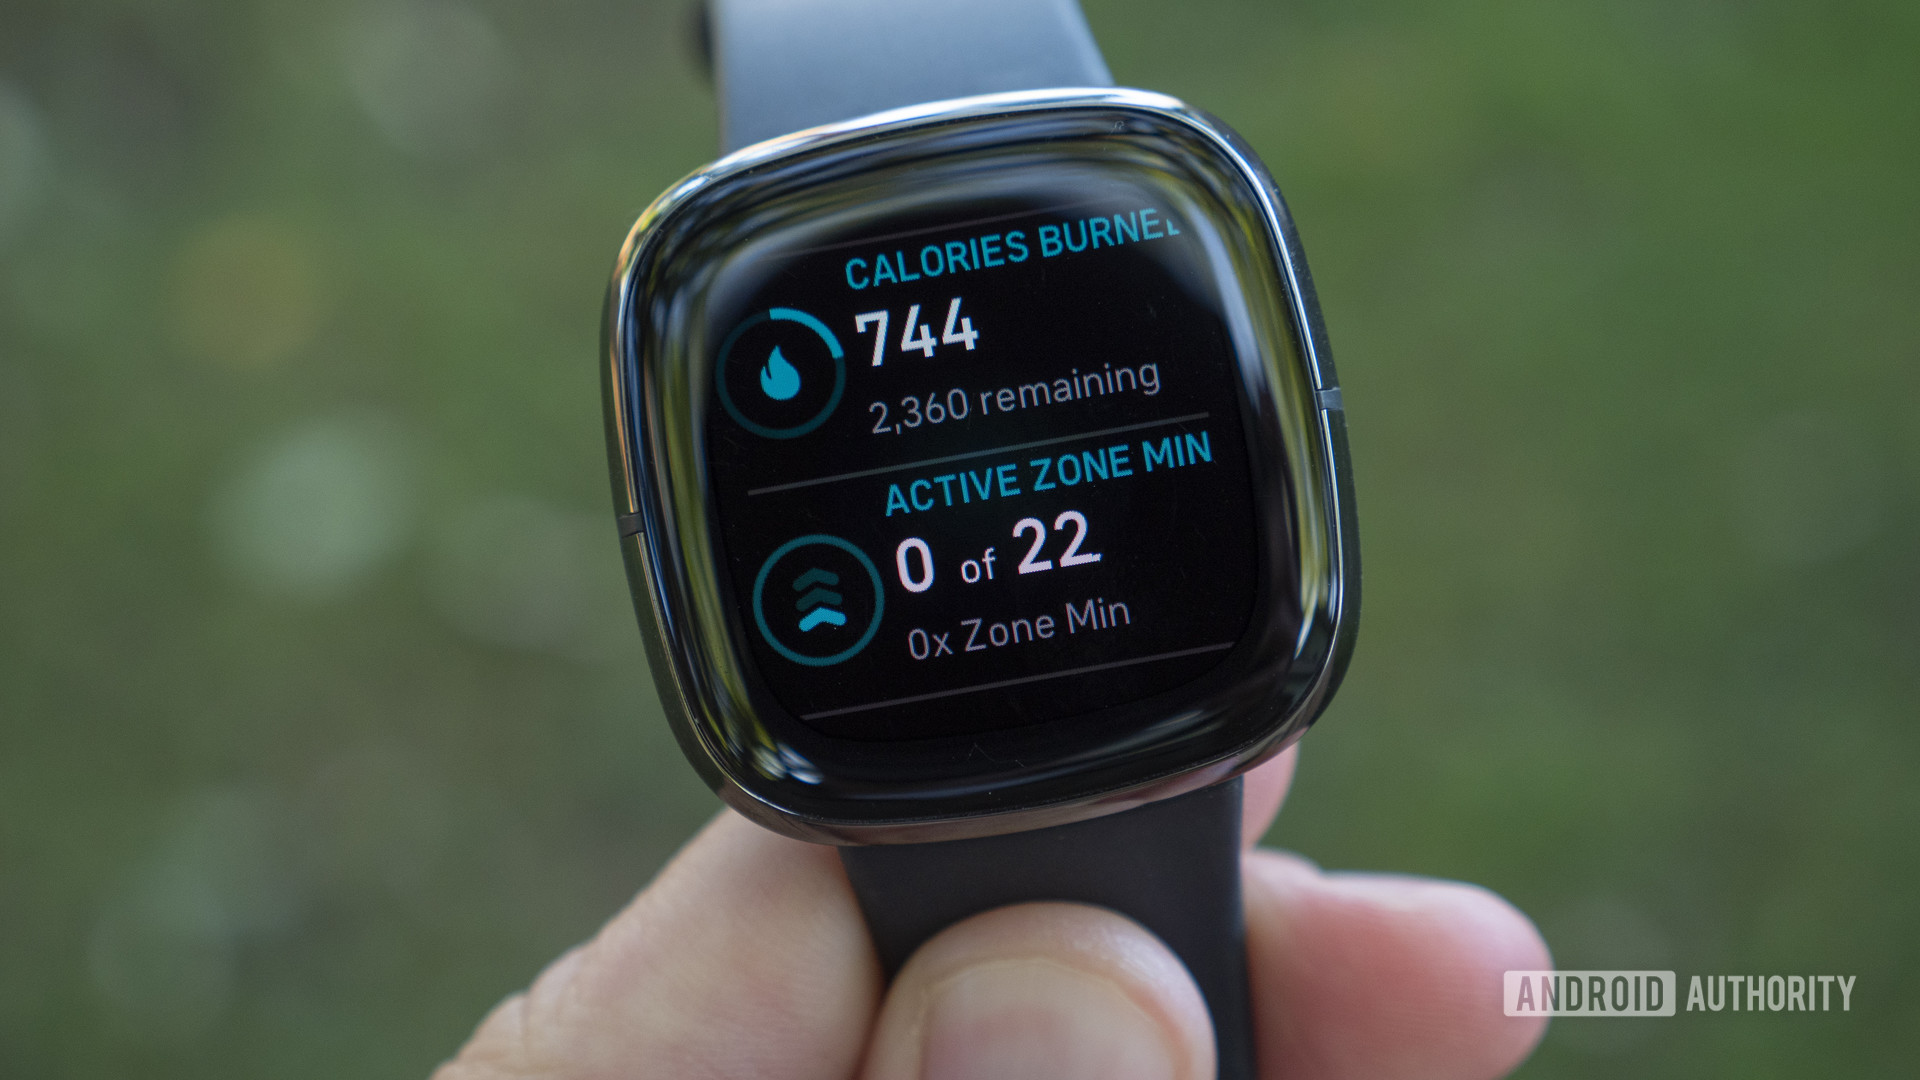 https://www.androidauthority.com/wp-content/uploads/2020/09/fitbit-sense-review-calories-burned-active-zone-minutes-today.jpg